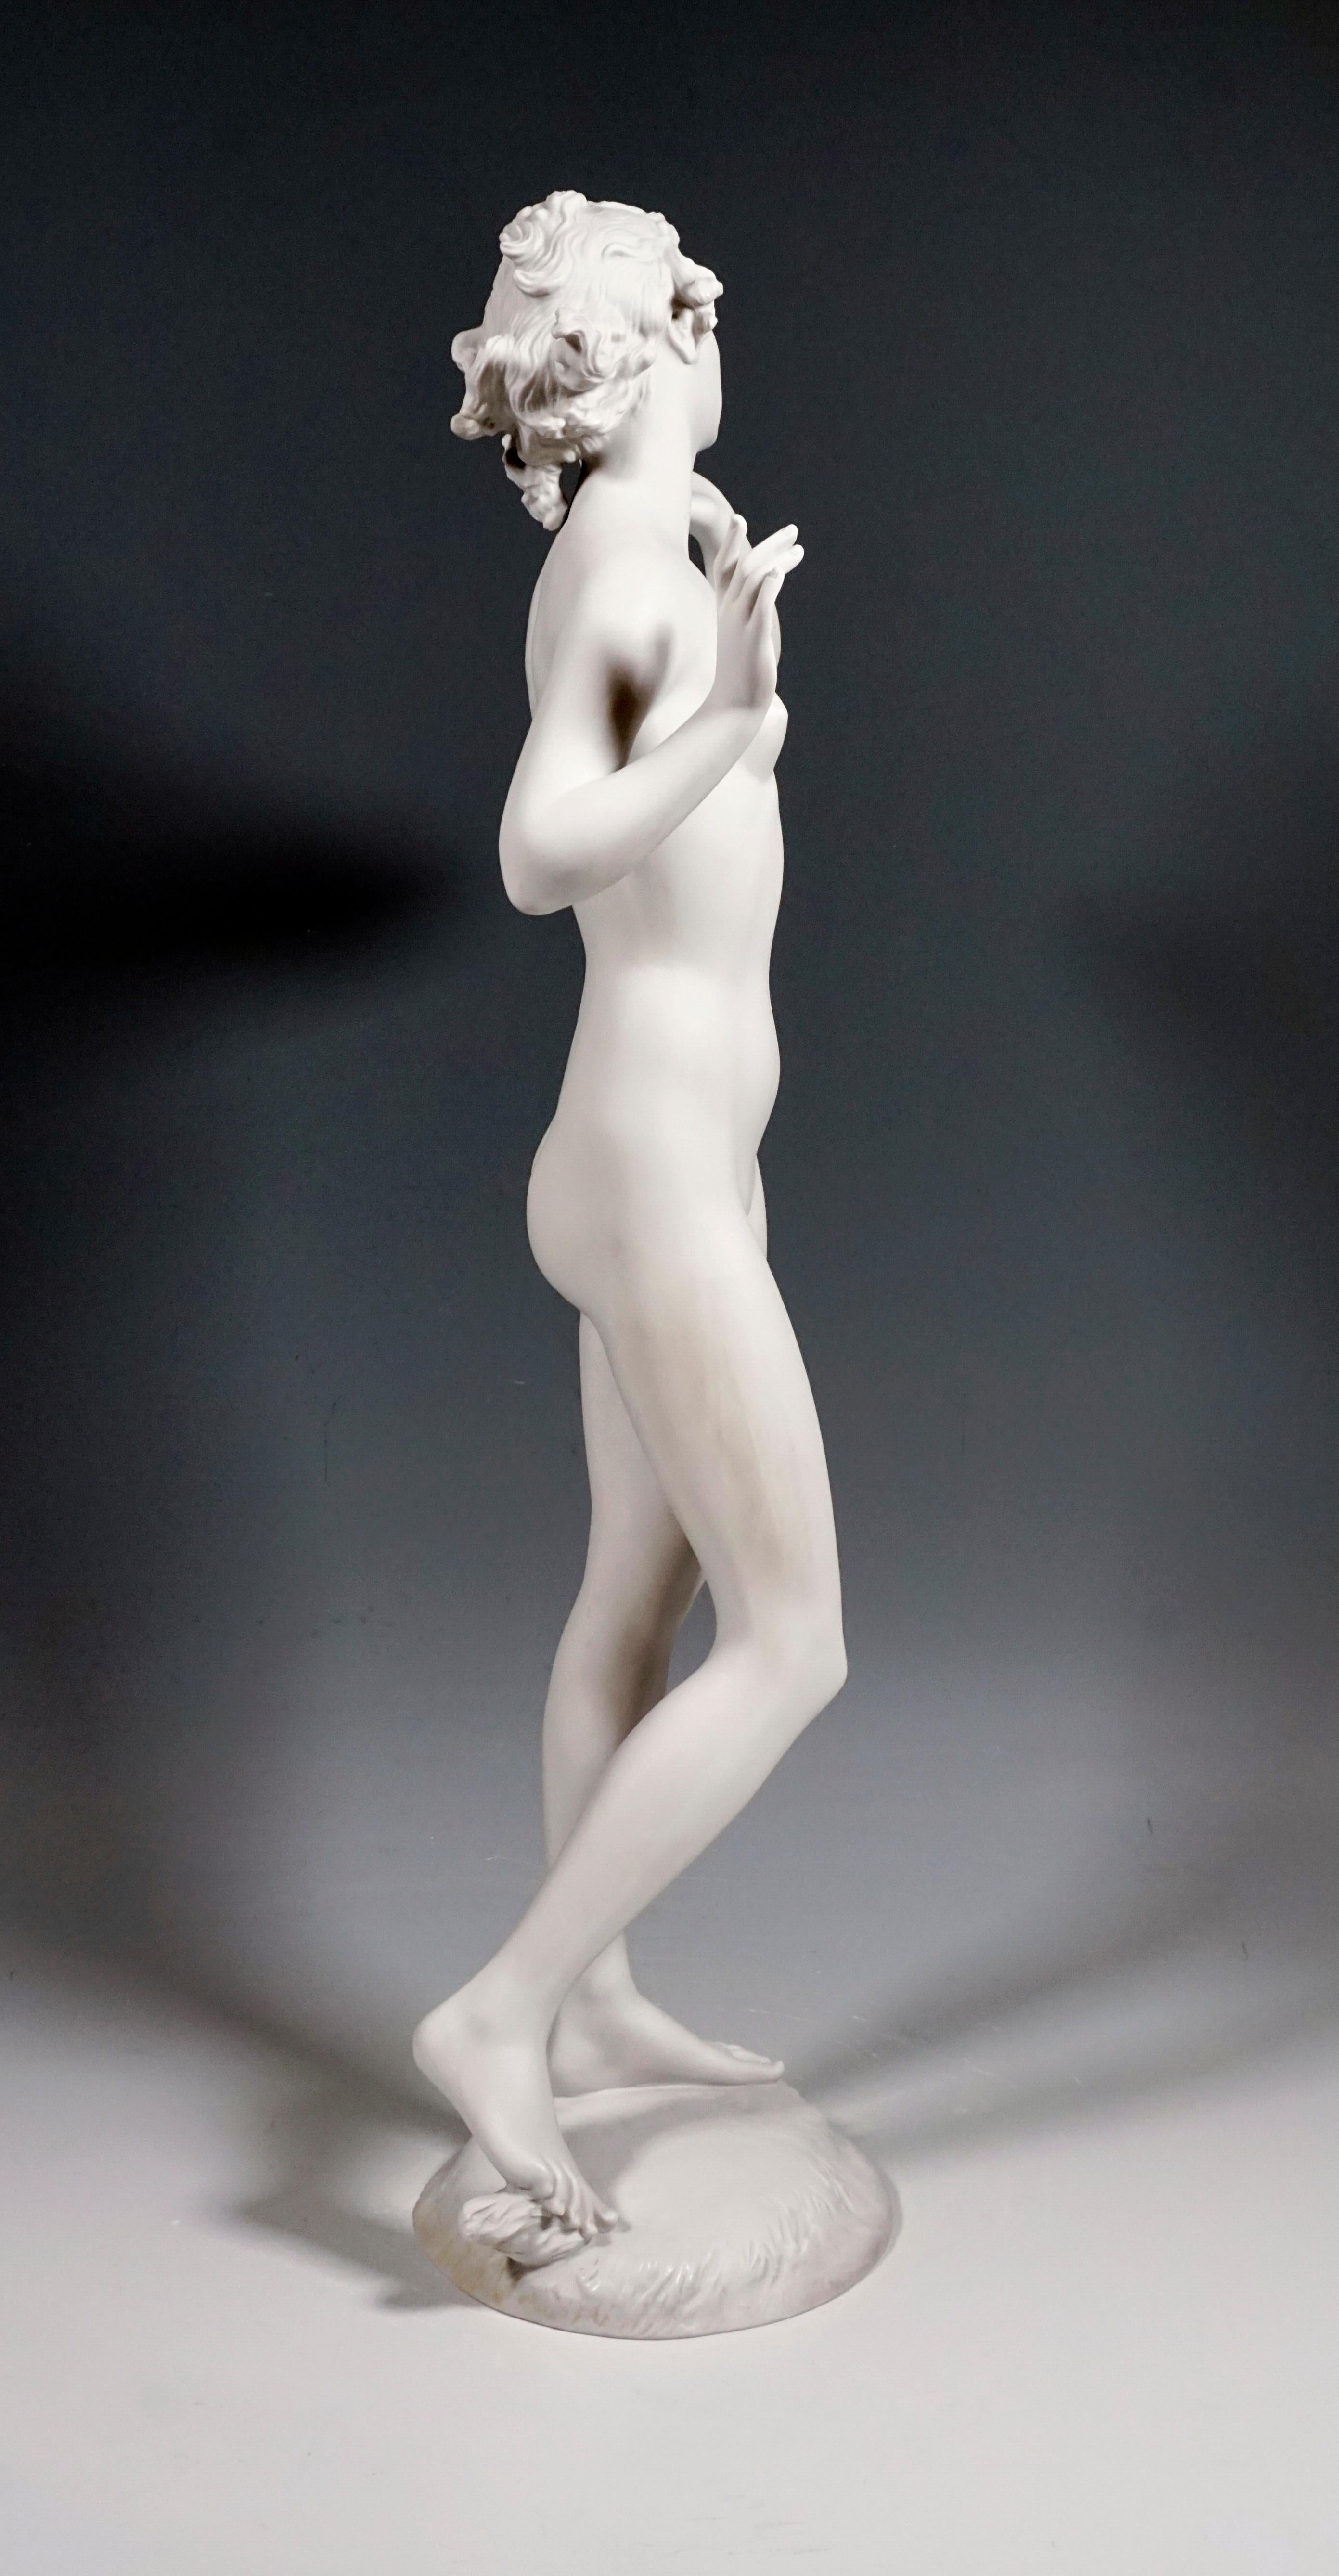 The young, naked beauty stands upright, turning to the side and looking into the distance, raising her hands to her head to take in the echo.
The figure is based on a flat, round meadow base, with the inscription 'M.H.FRITZ' on the underside of the